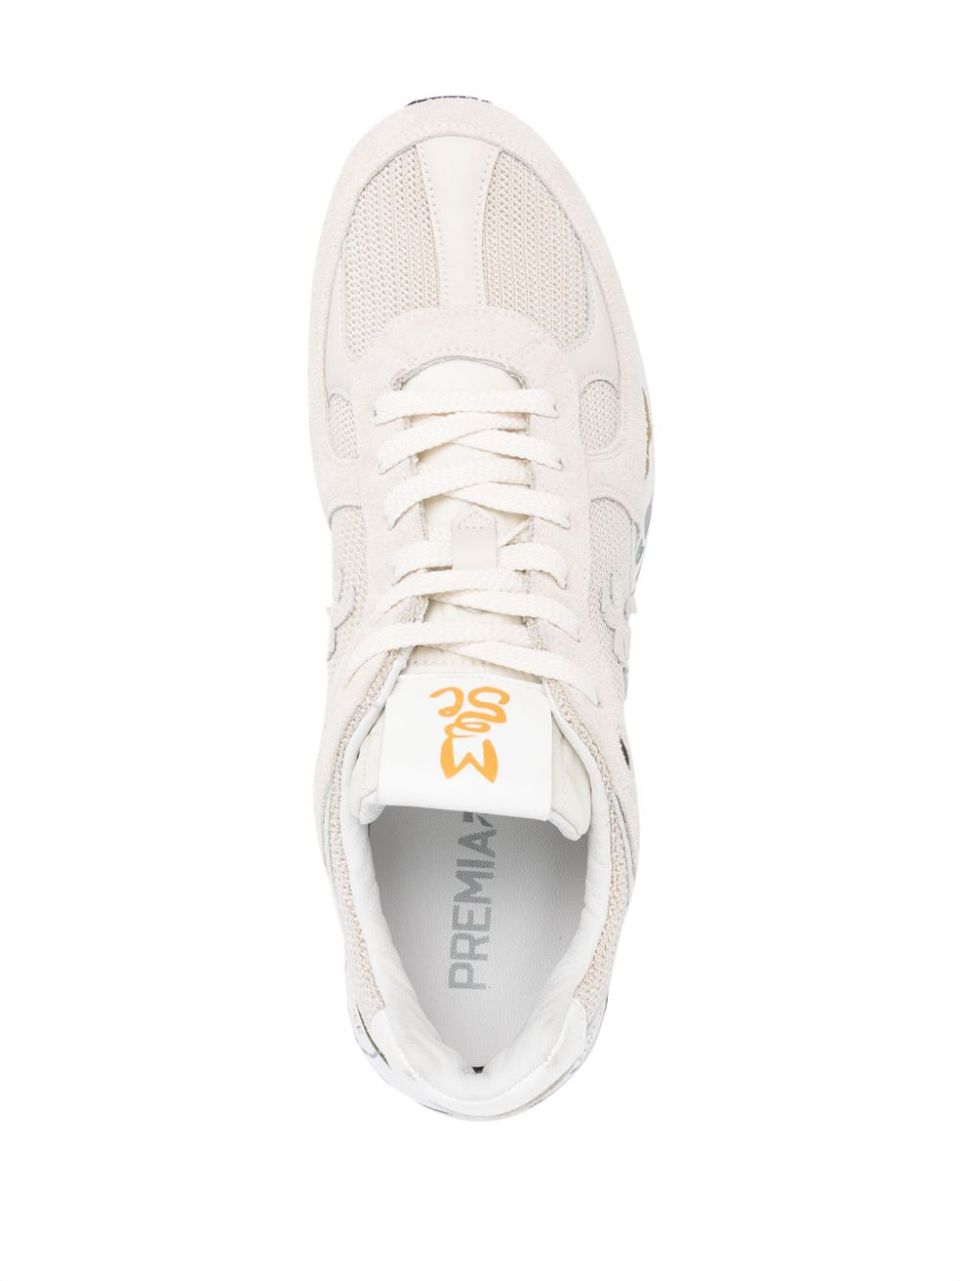 'Mase 6628' sneakers